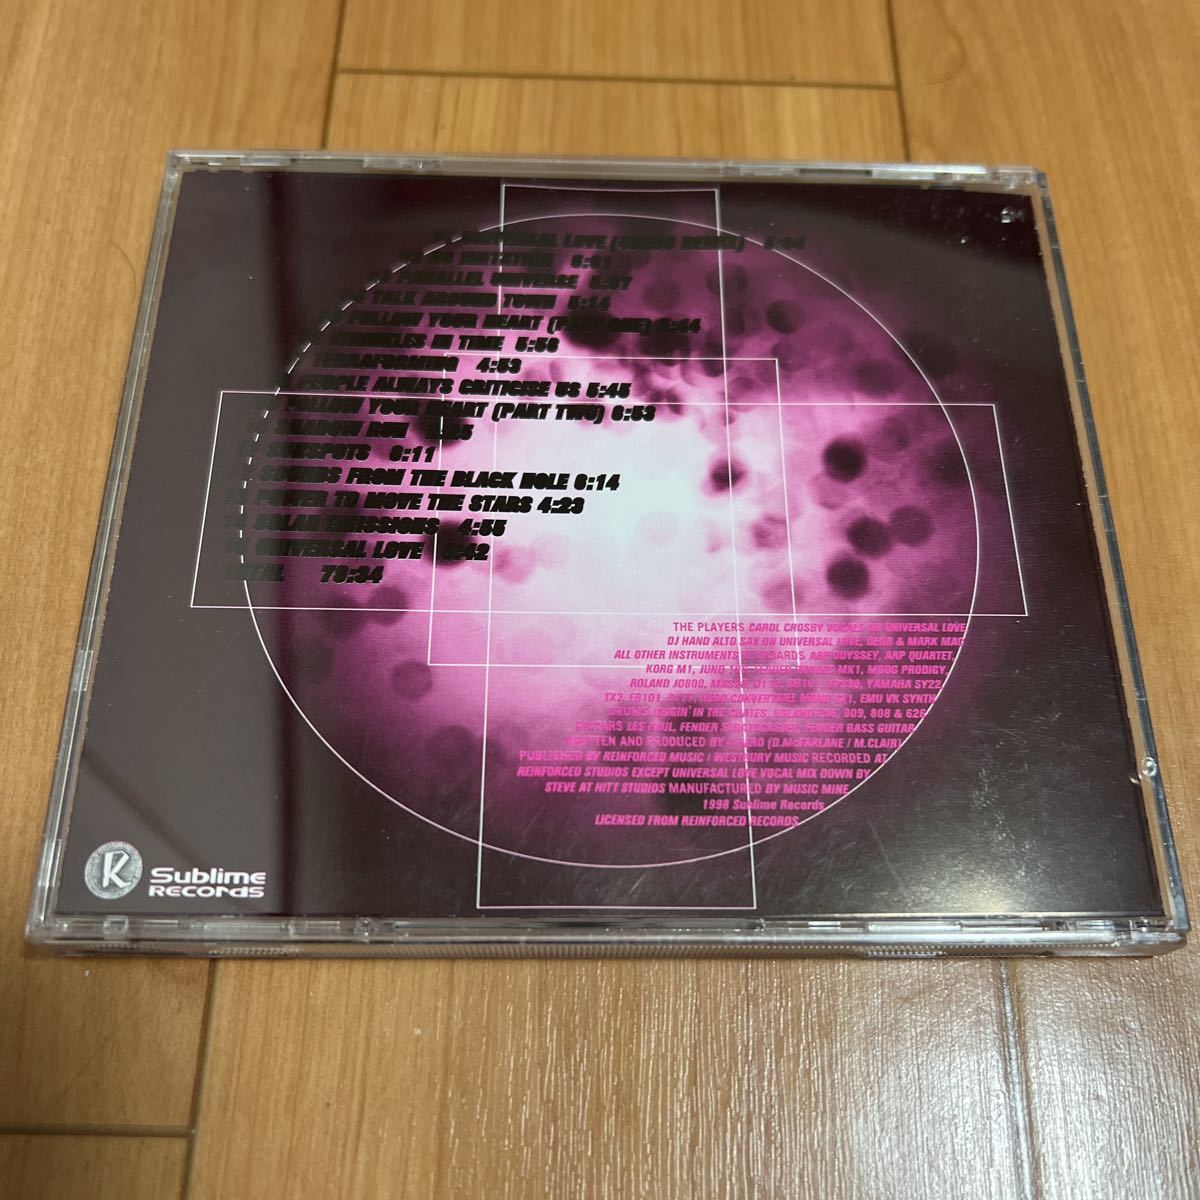 【Drum & Bass】4 Hero / Parallel Universe - Sublime Records . Reinforced Records . Jungle ドラムンベース ジャングル_画像3